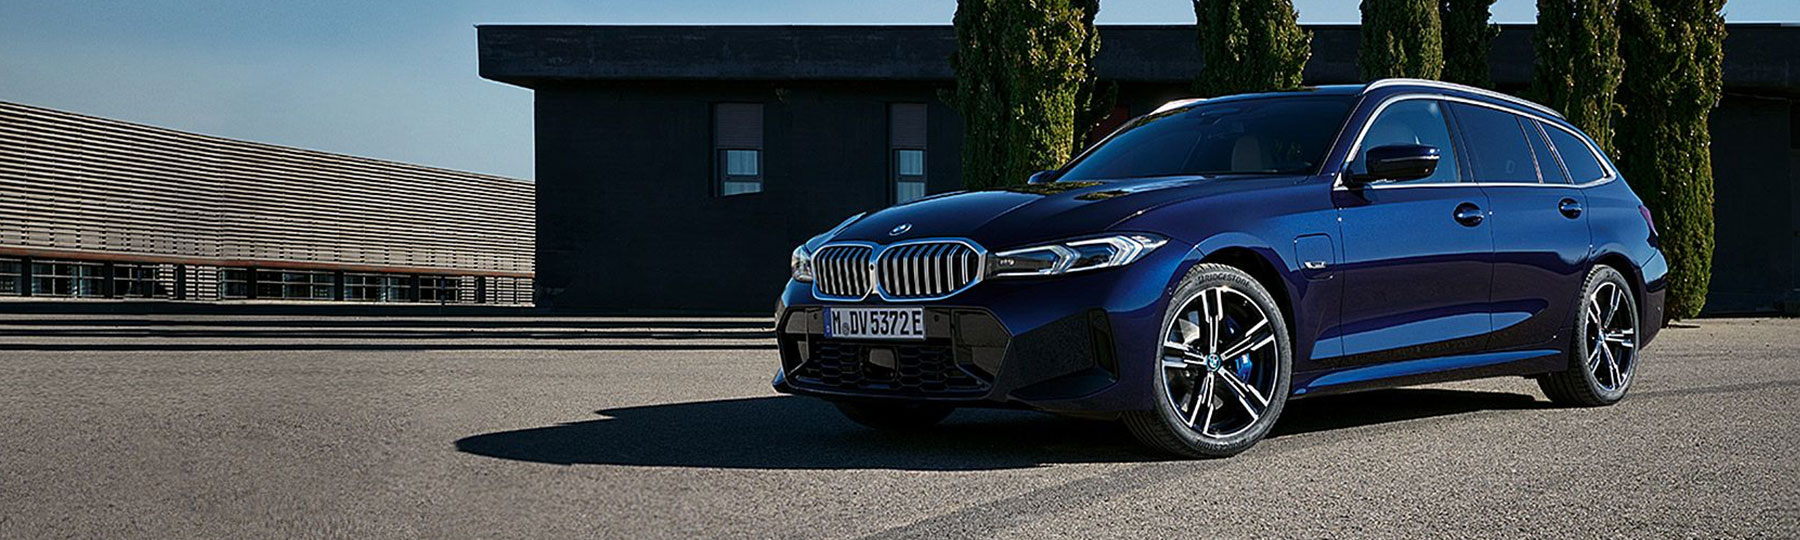 New BMW 3 Series Touring New Car Offer